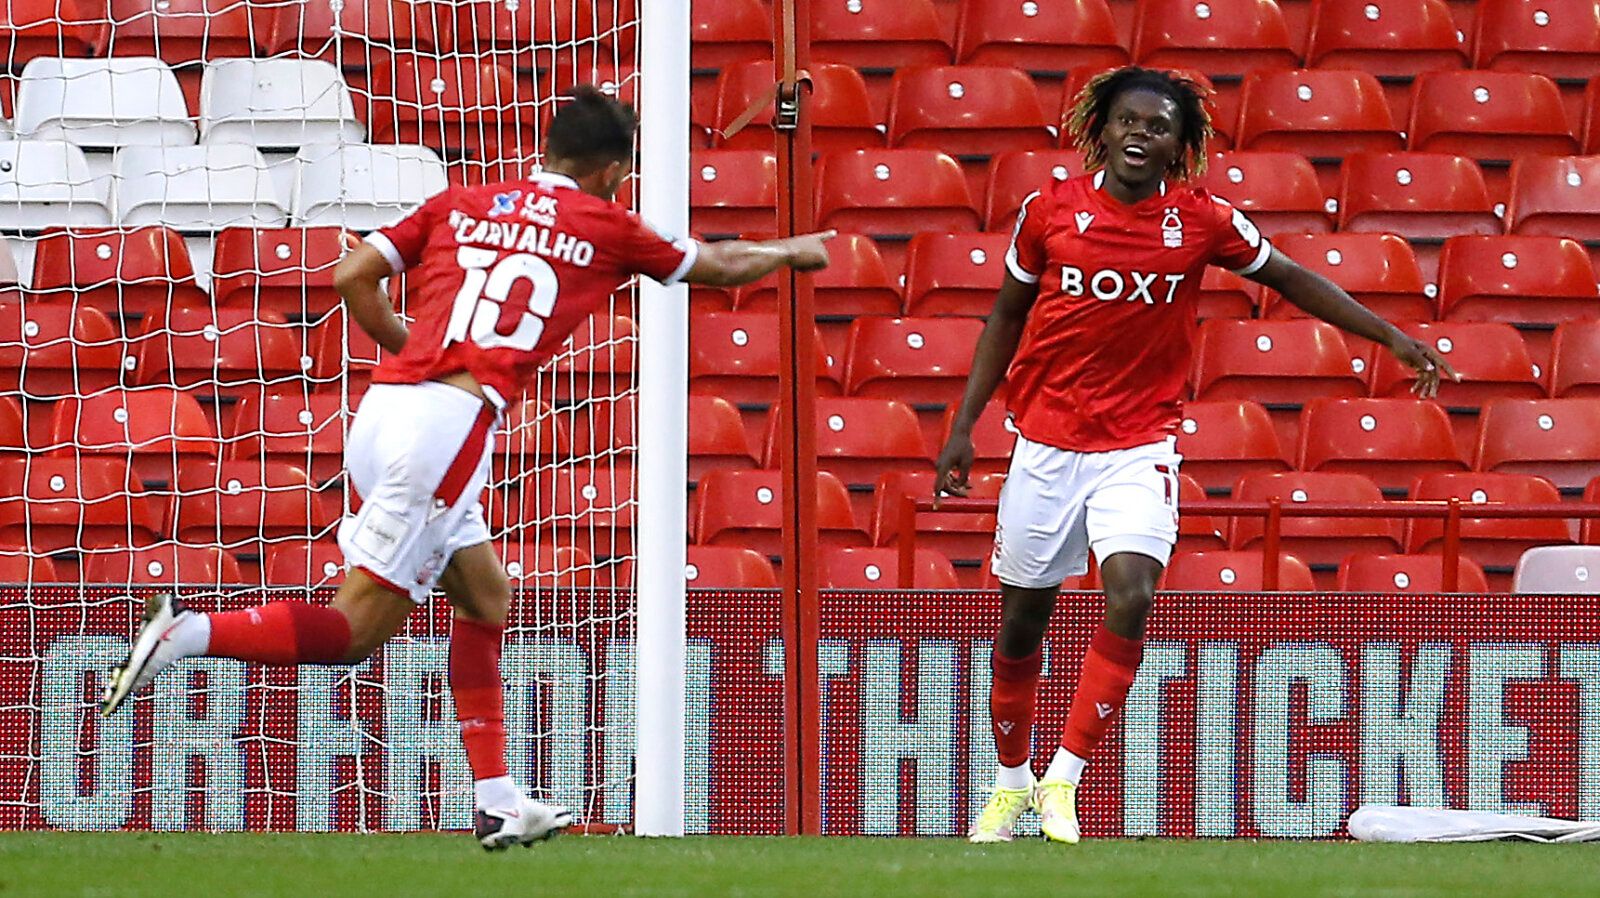 Soccer Football - Carabao Cup - First Round - Nottingham Forest v Bradford City - The City Ground, Nottingham, Britain - August 11, 2021 Nottingham Forest's Joao Carvalho celebrates scoring their first goal Action Images/Craig Brough EDITORIAL USE ONLY. No use with unauthorized audio, video, data, fixture lists, club/league logos or 'live' services. Online in-match use limited to 75 images, no video emulation. No use in betting, games or single club /league/player publications.  Please contact y